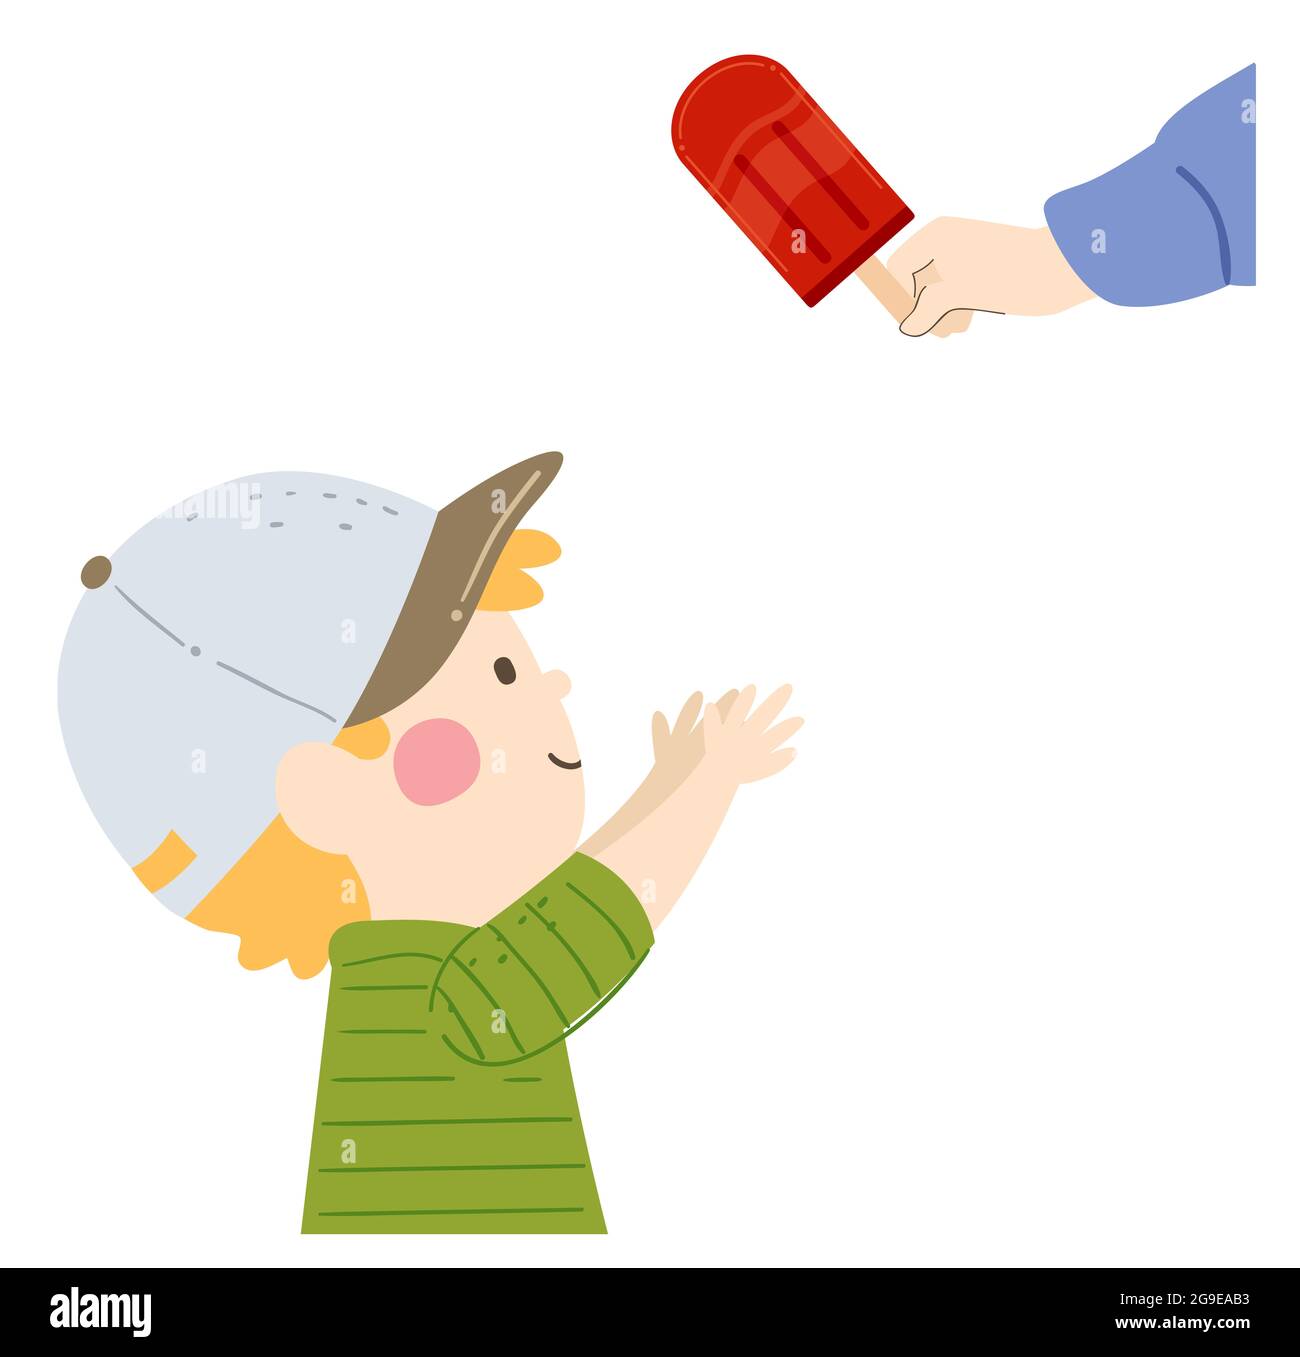 Illustration of a Kid Boy Receiving a Pop Stick from a Hand Stock Photo